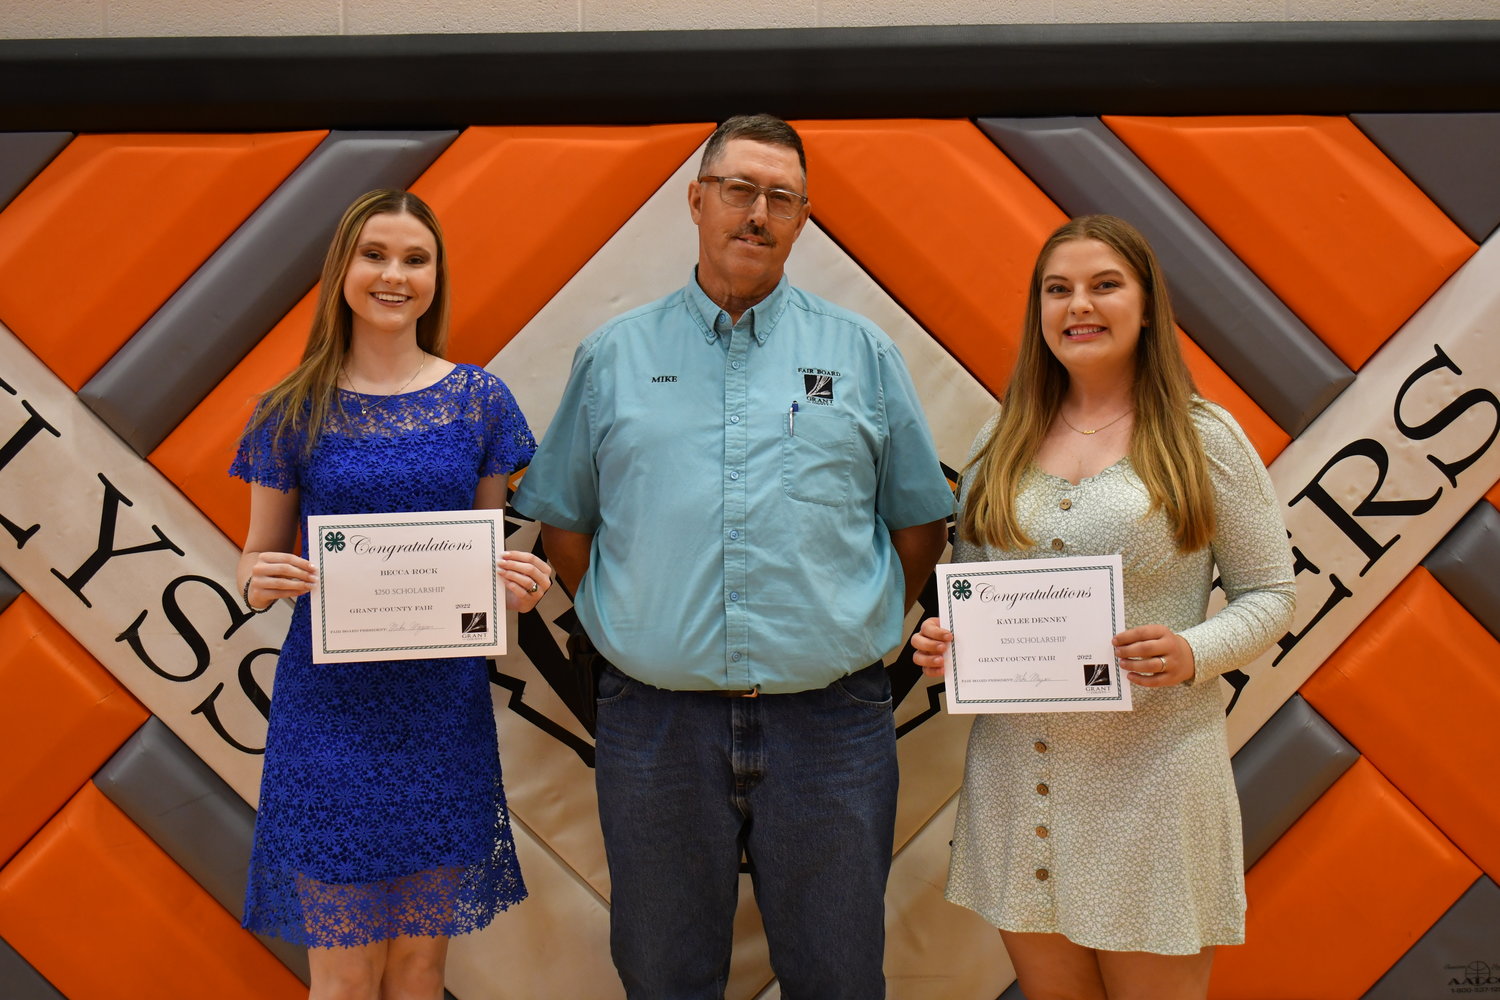 Senior Awards — Becca Rock and Kaylee Denney were given the Grant County Fair Board Scholarship by Mike Meyer on Friday, May 13, 2022.